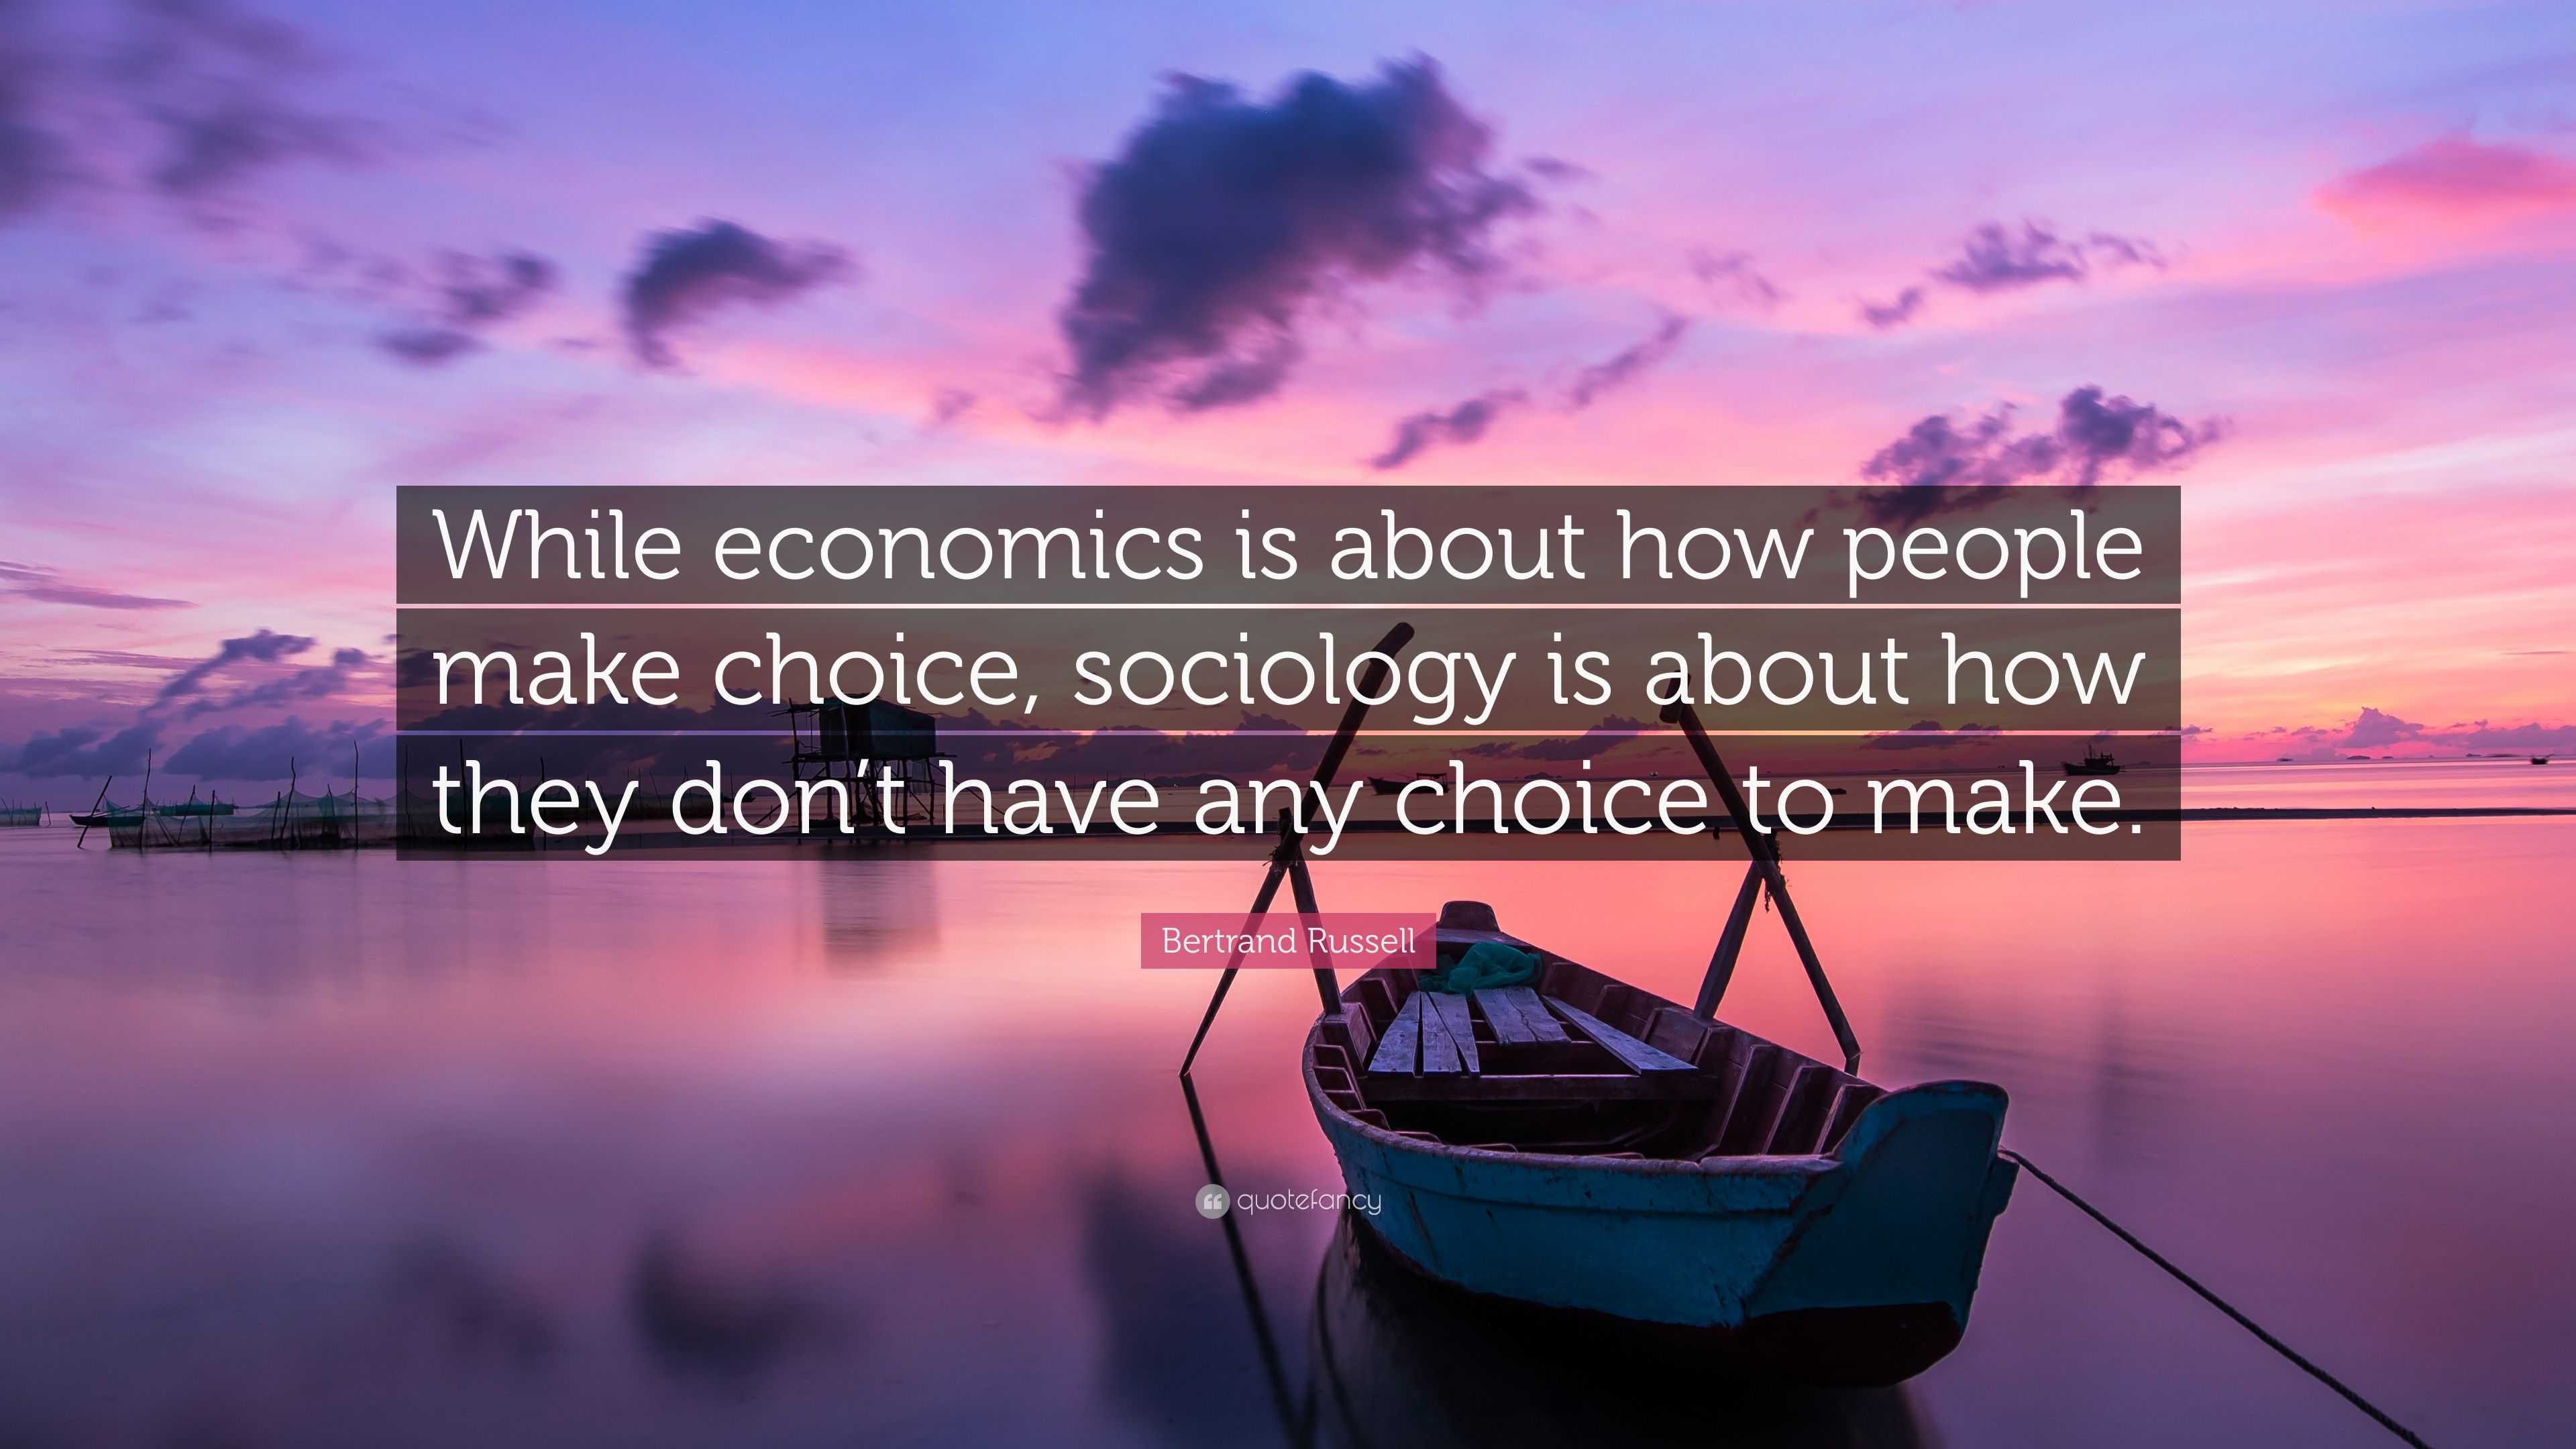 Bertrand Russell Quote: “While economics is about how people make